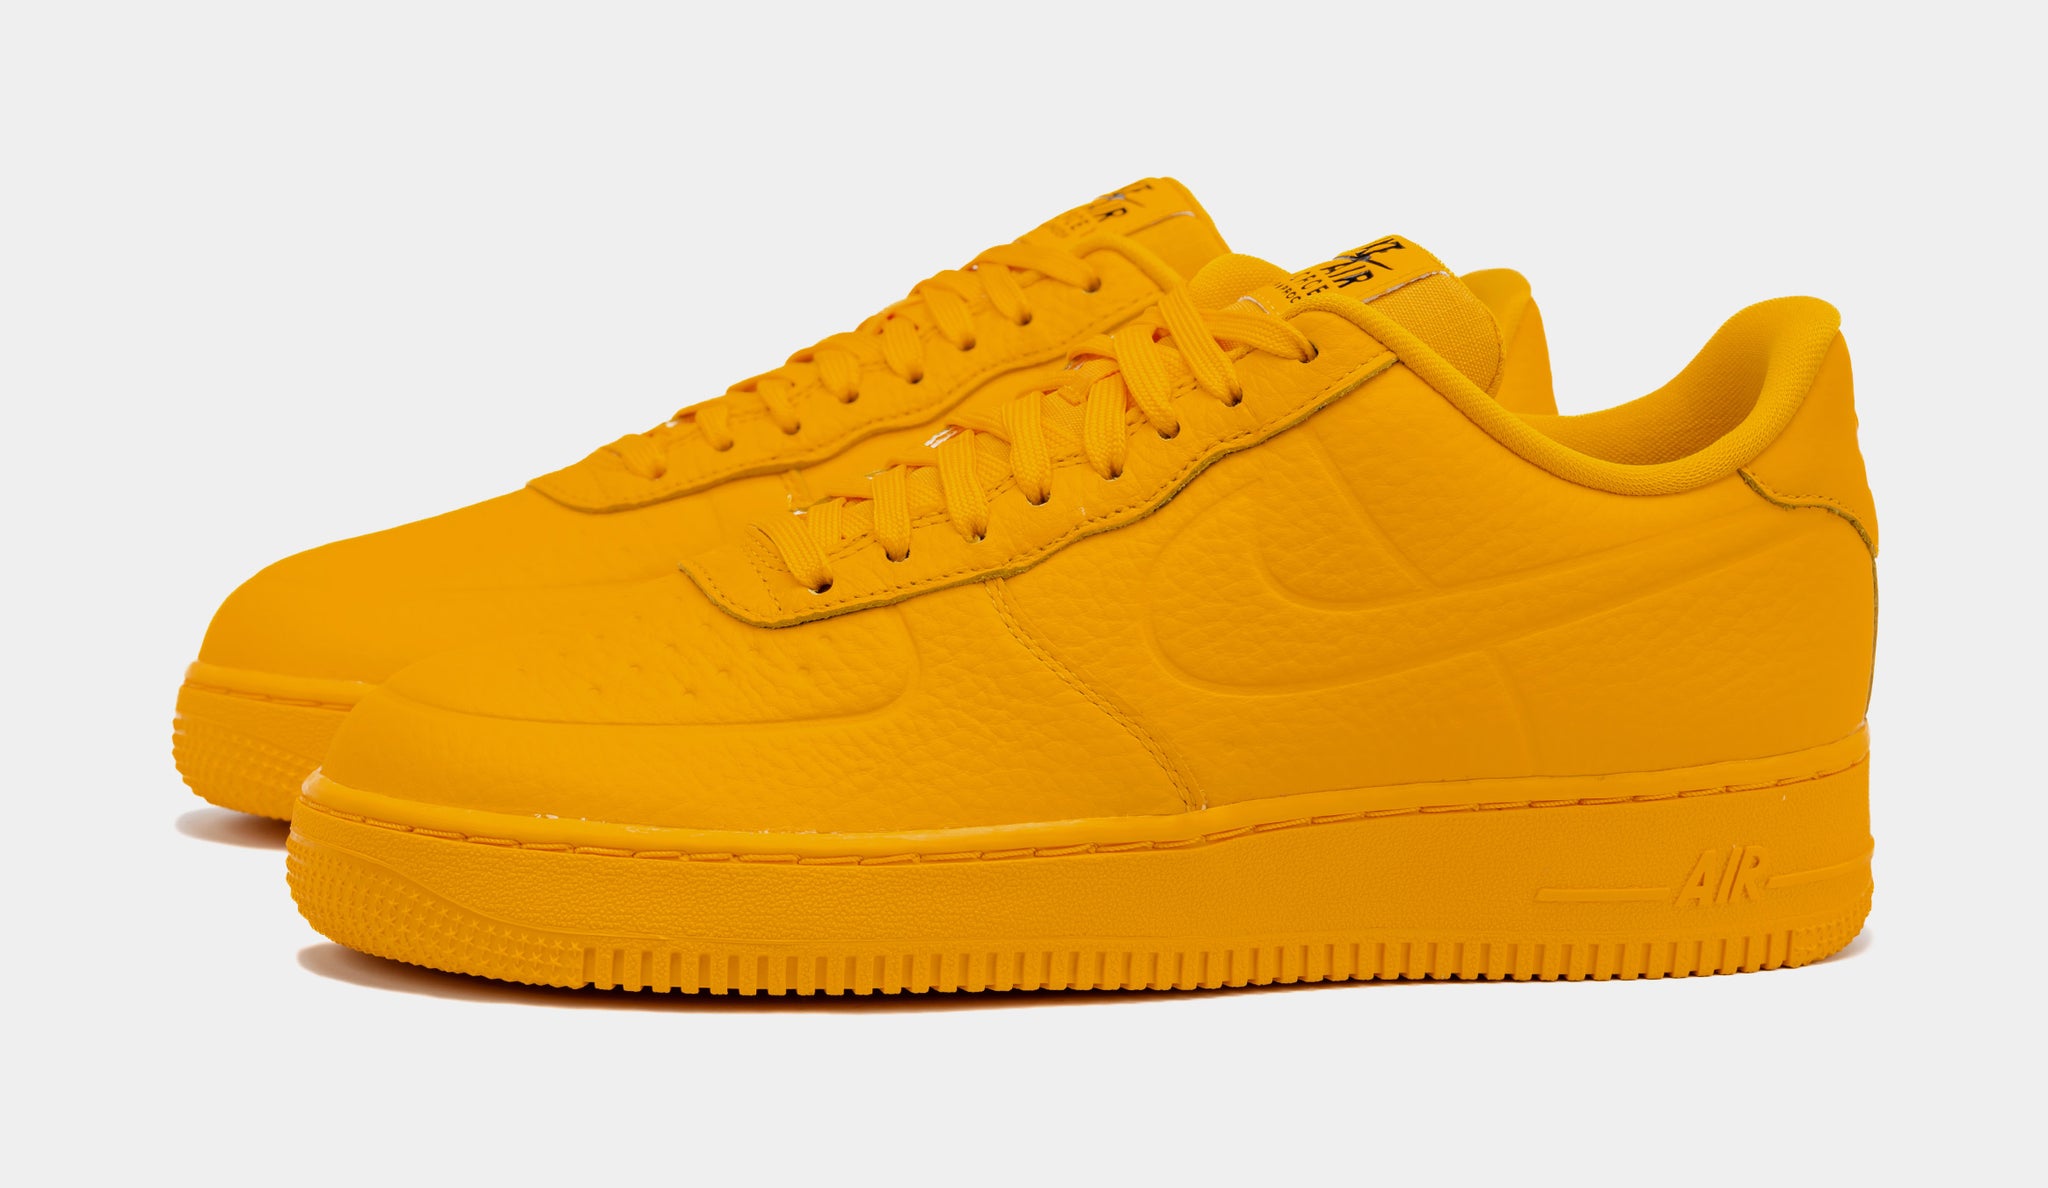 Nike Air Force 1 Low 82 Mens Lifestyle Shoes Yellow DO9786-700